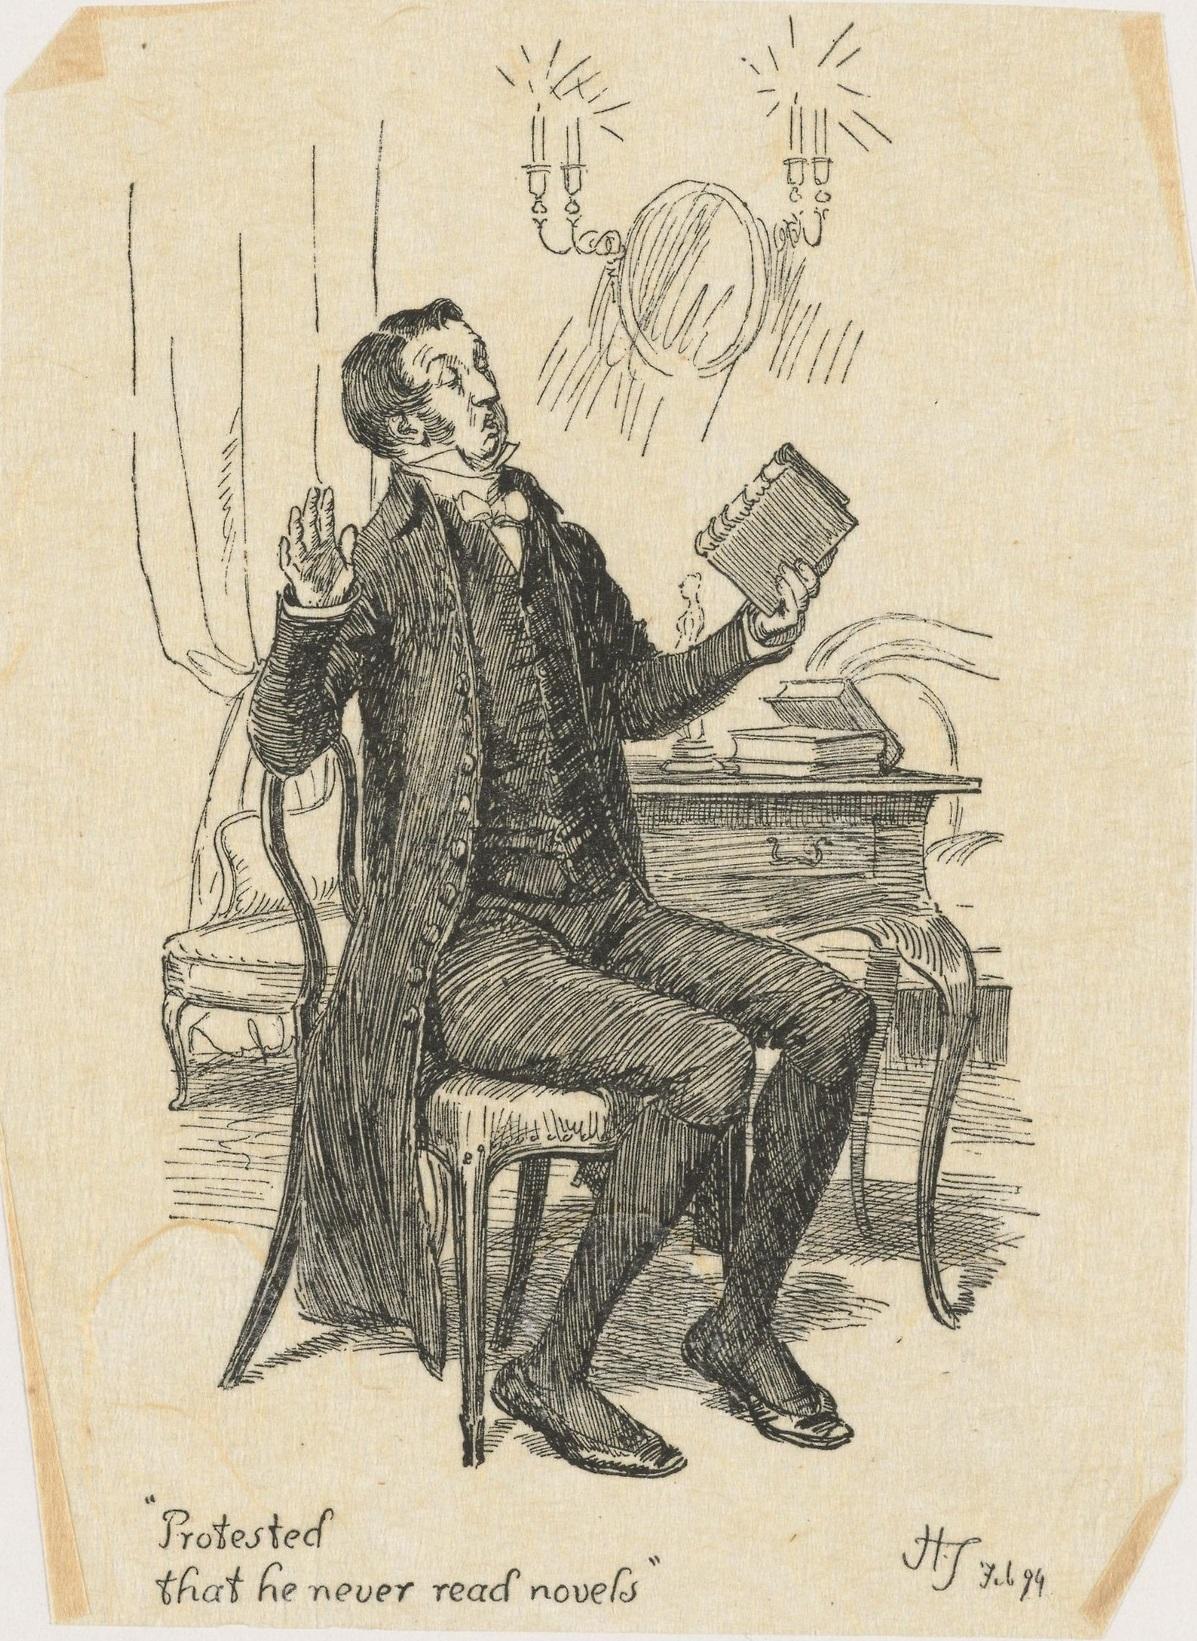 An illustration by Hugh Thomson representing Mr. Collins, protesting that he never reads novels. (Public Domain)